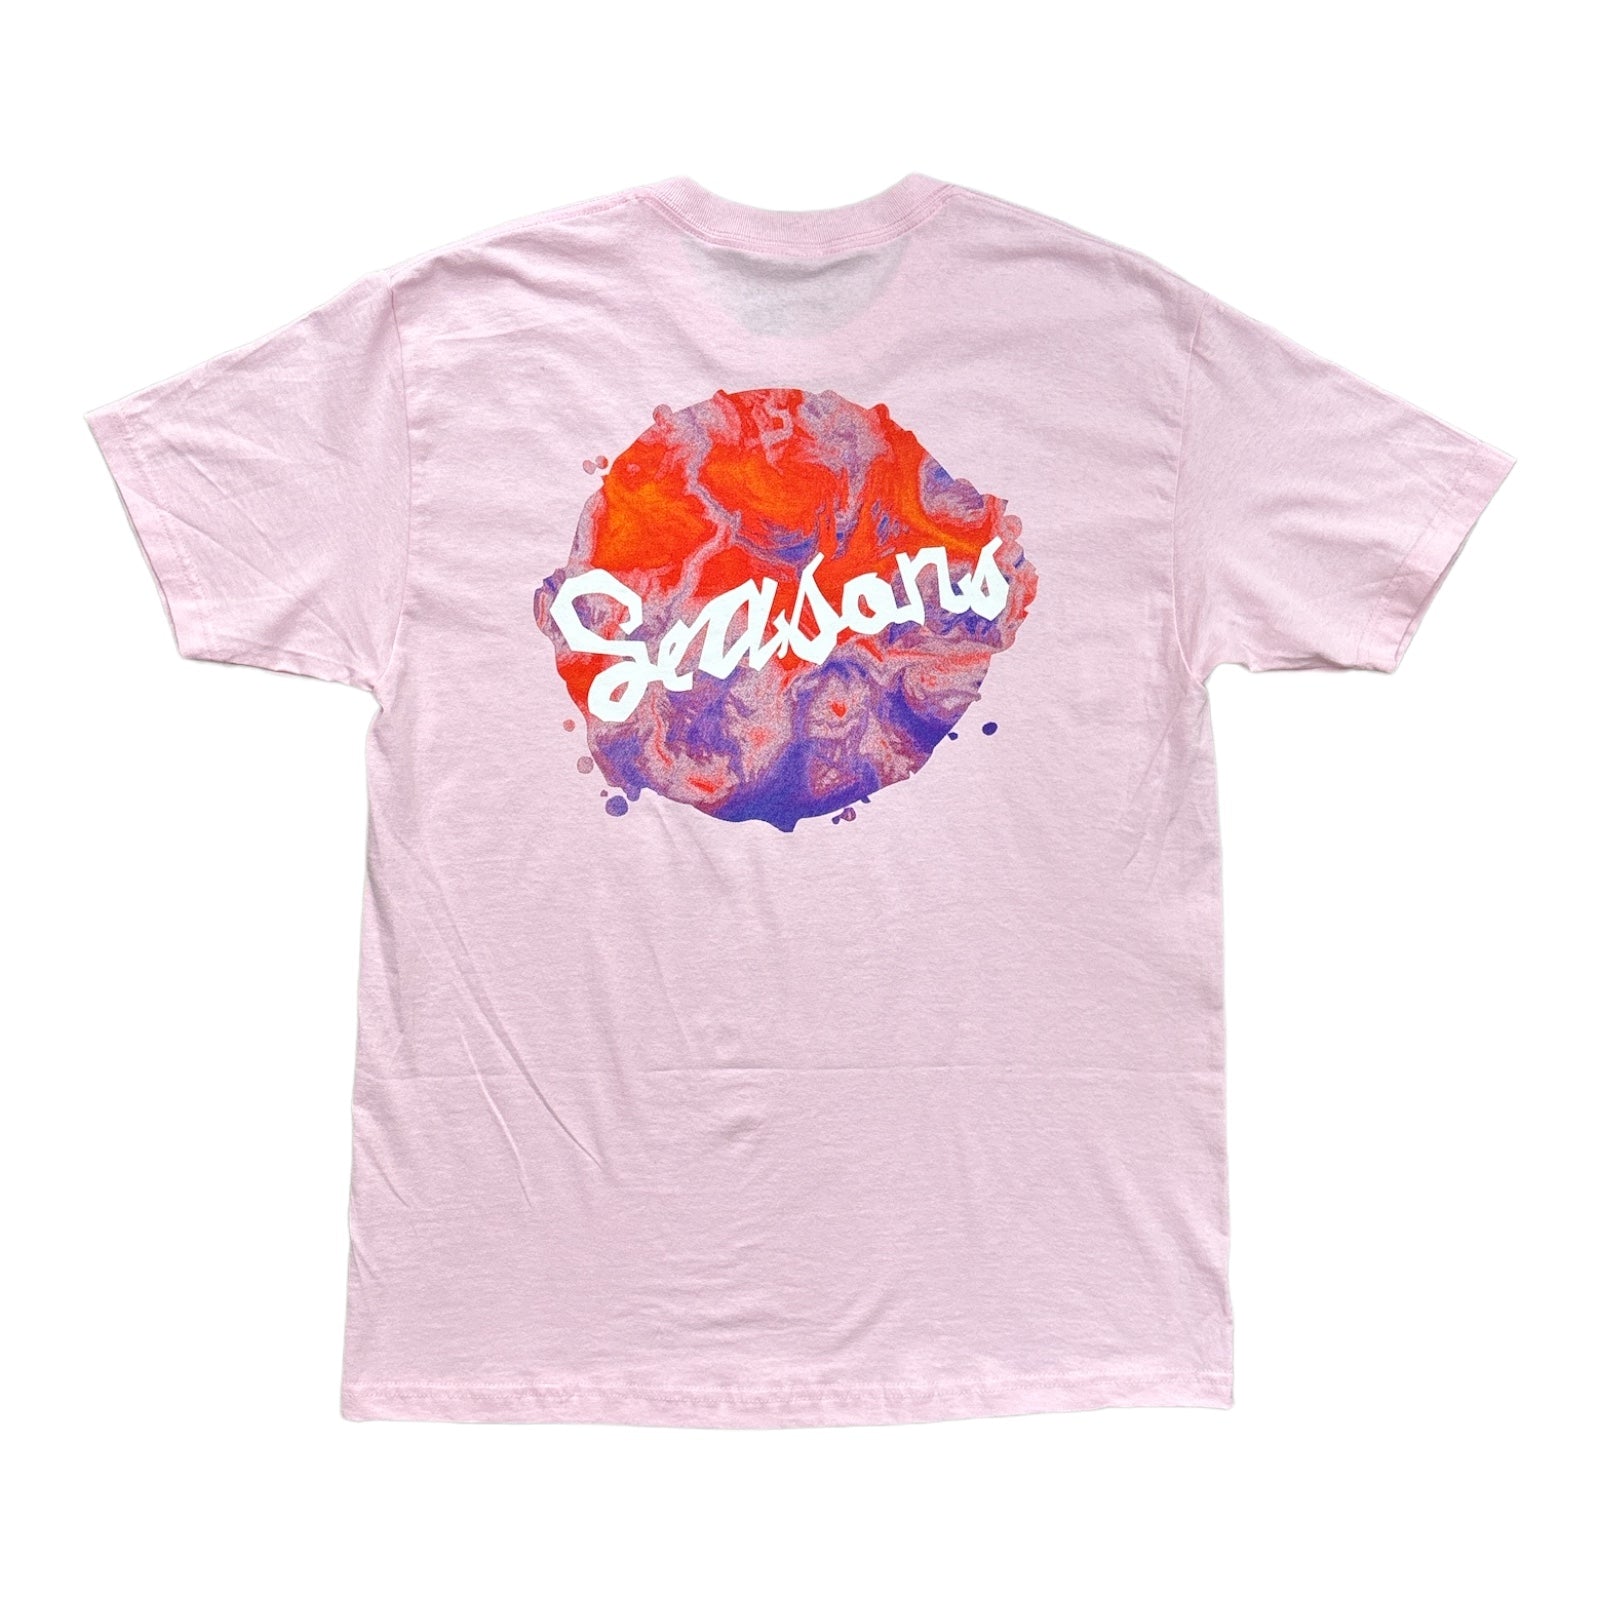 Pink Tee with Seasons Blotch Logo in Multiple Colors Swirled on a back print.